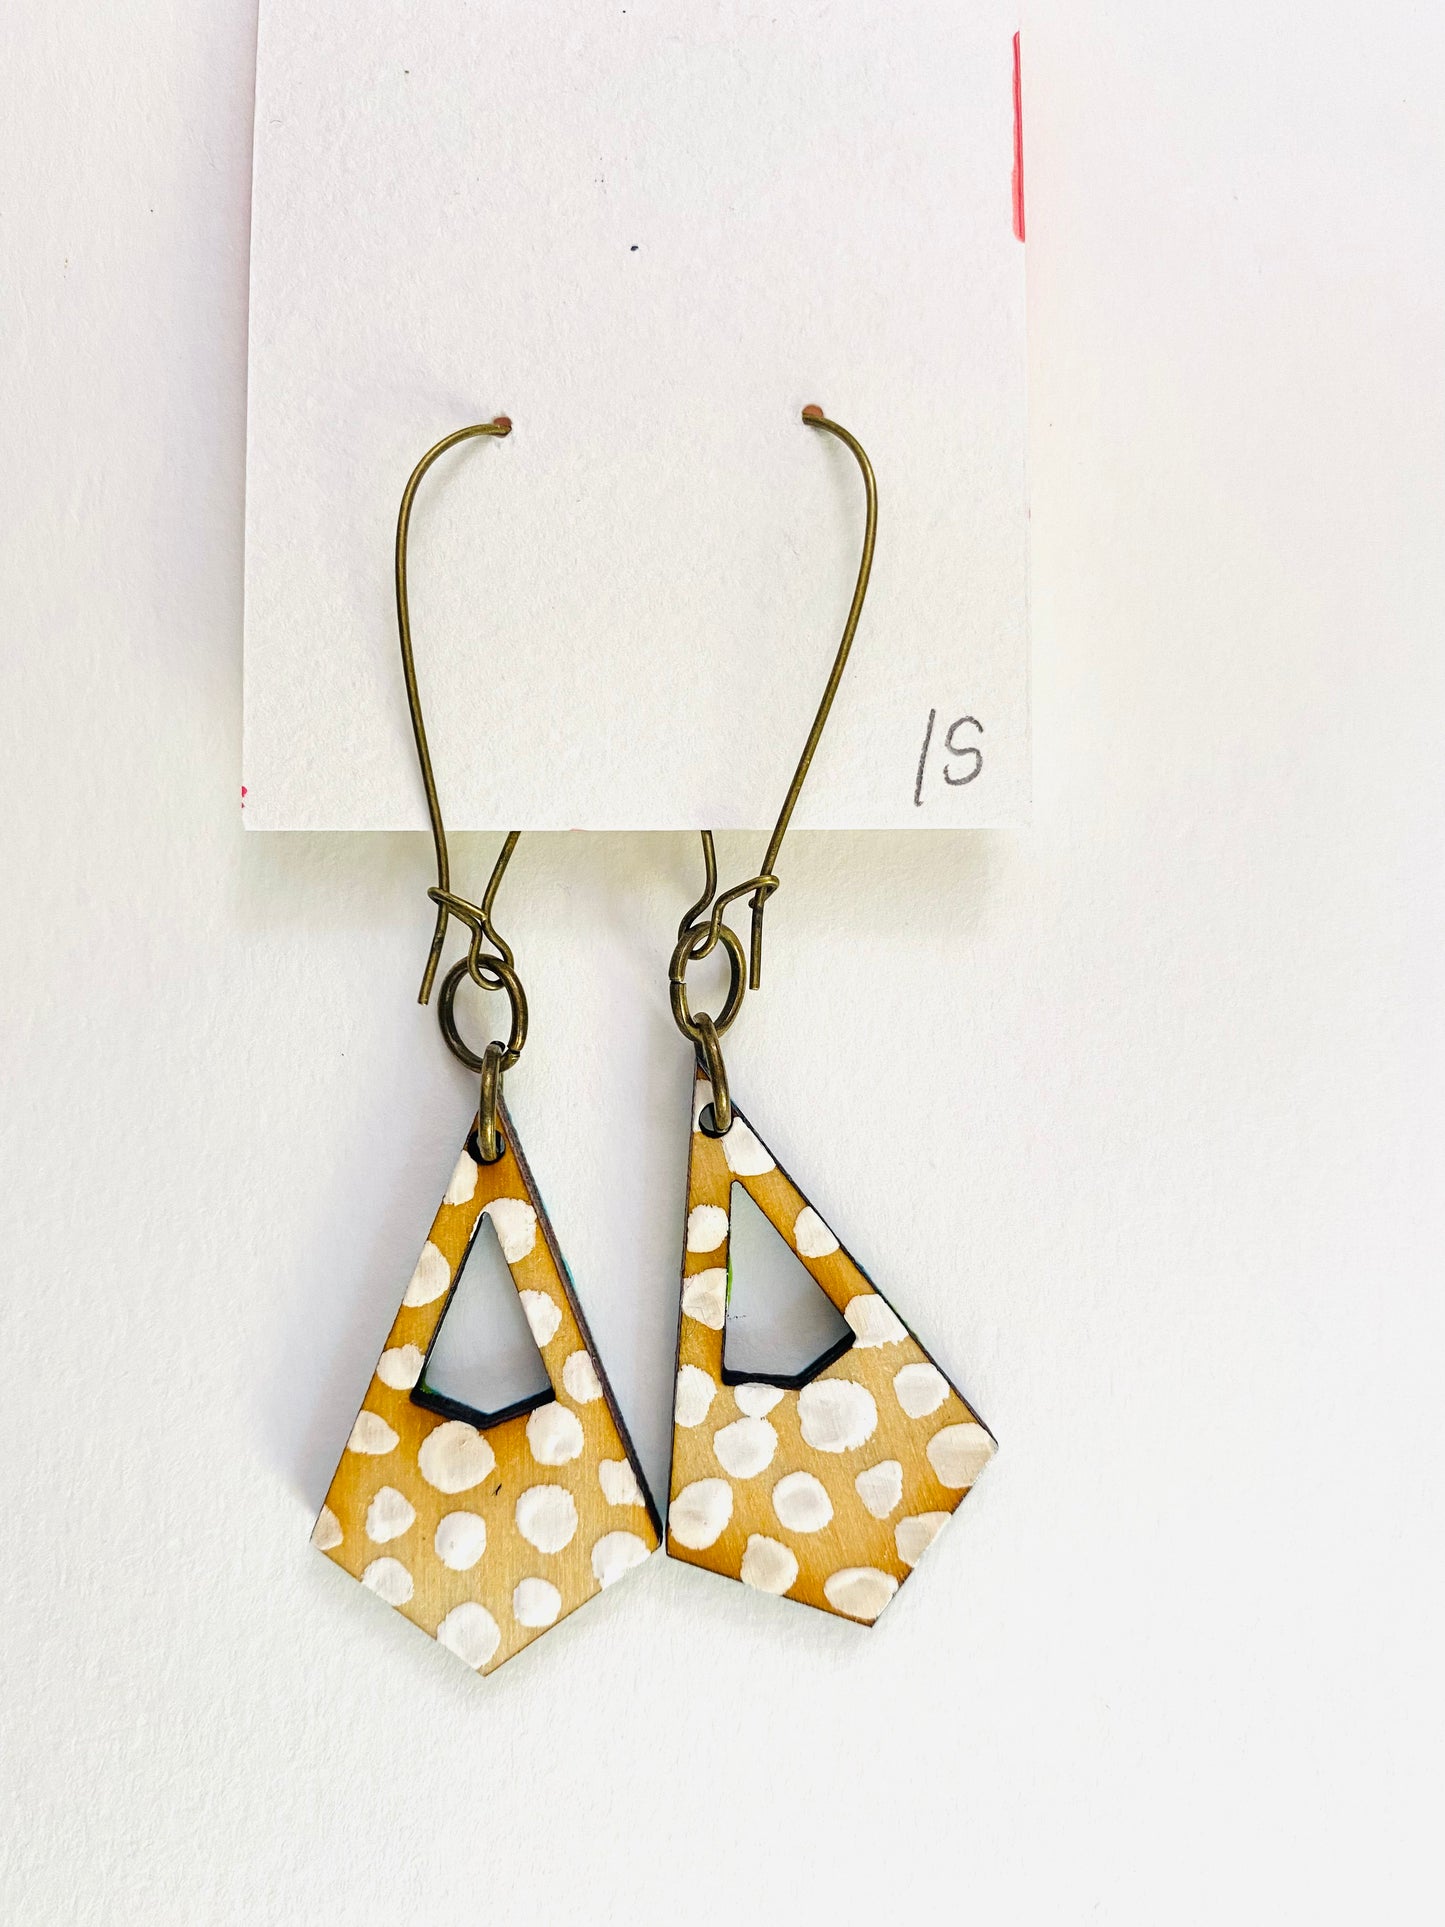 Colorful, Hand Painted, Geometric Shaped Earrings 15